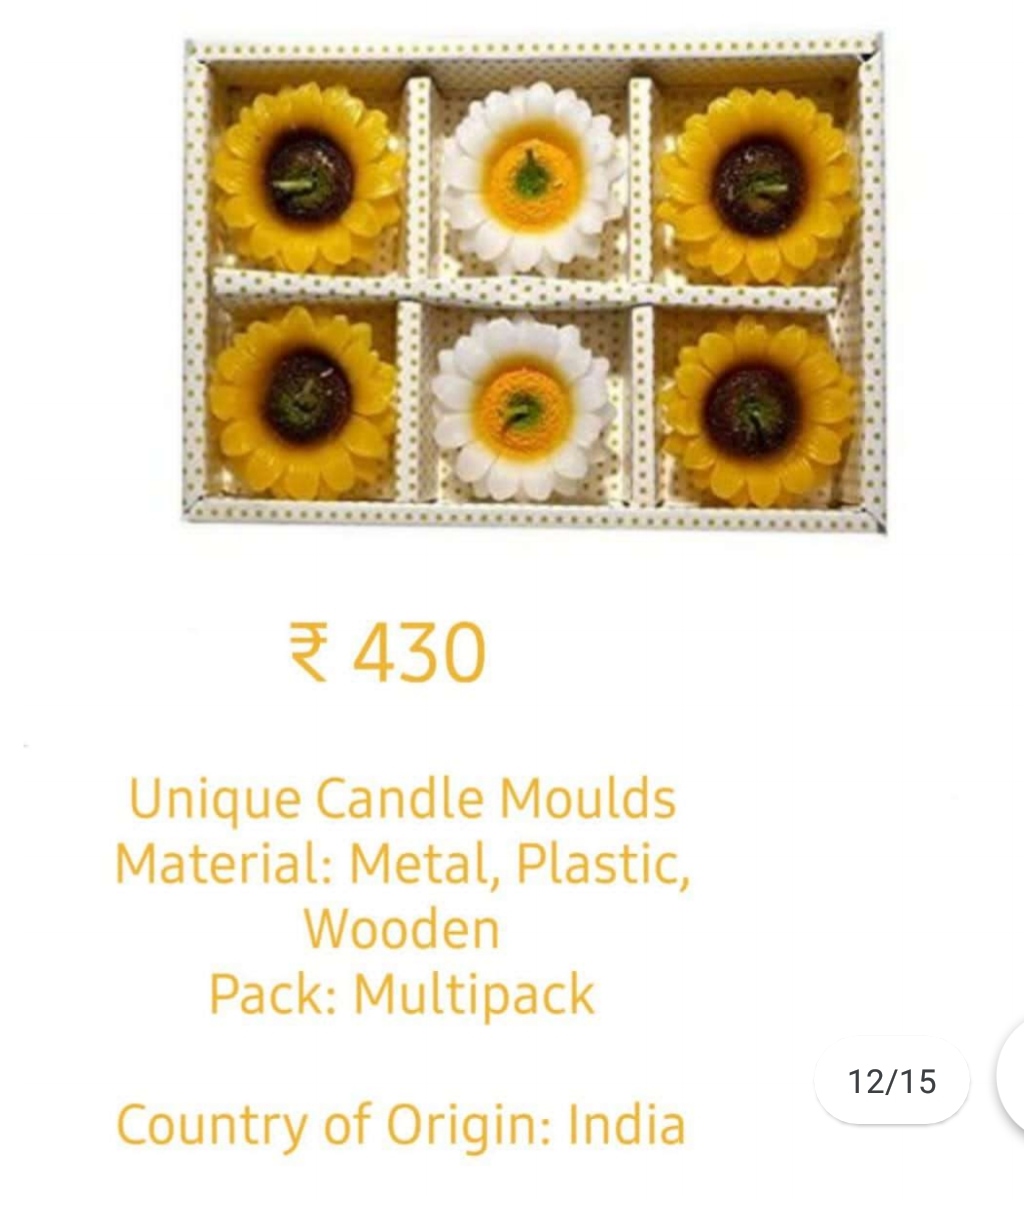 Sunflower candles from Veda's Decor Enterprises